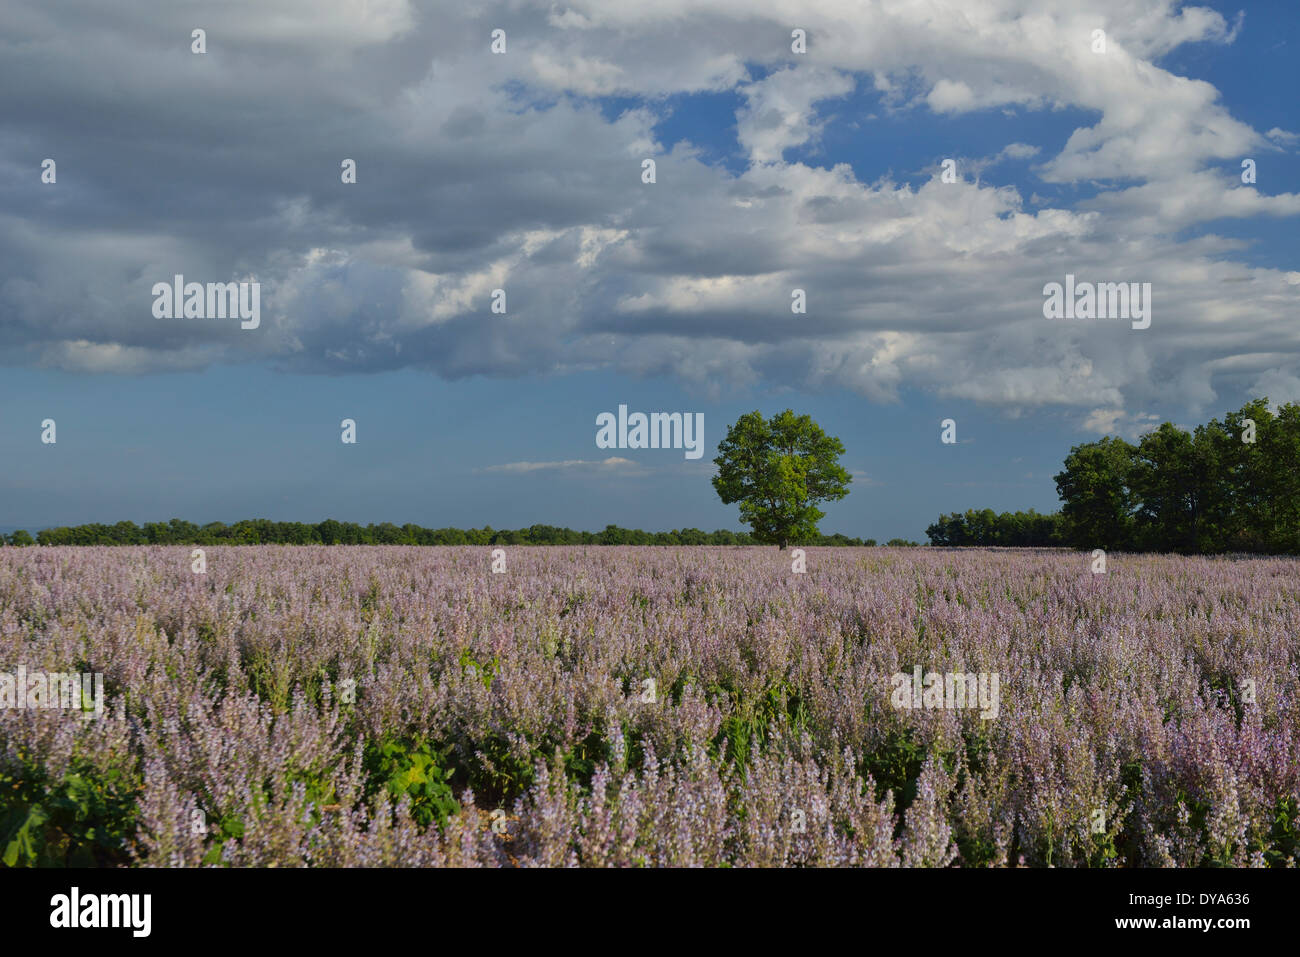 France, Provence, landscape, flowers, bloom, summer, tree, no people, field, Stock Photo